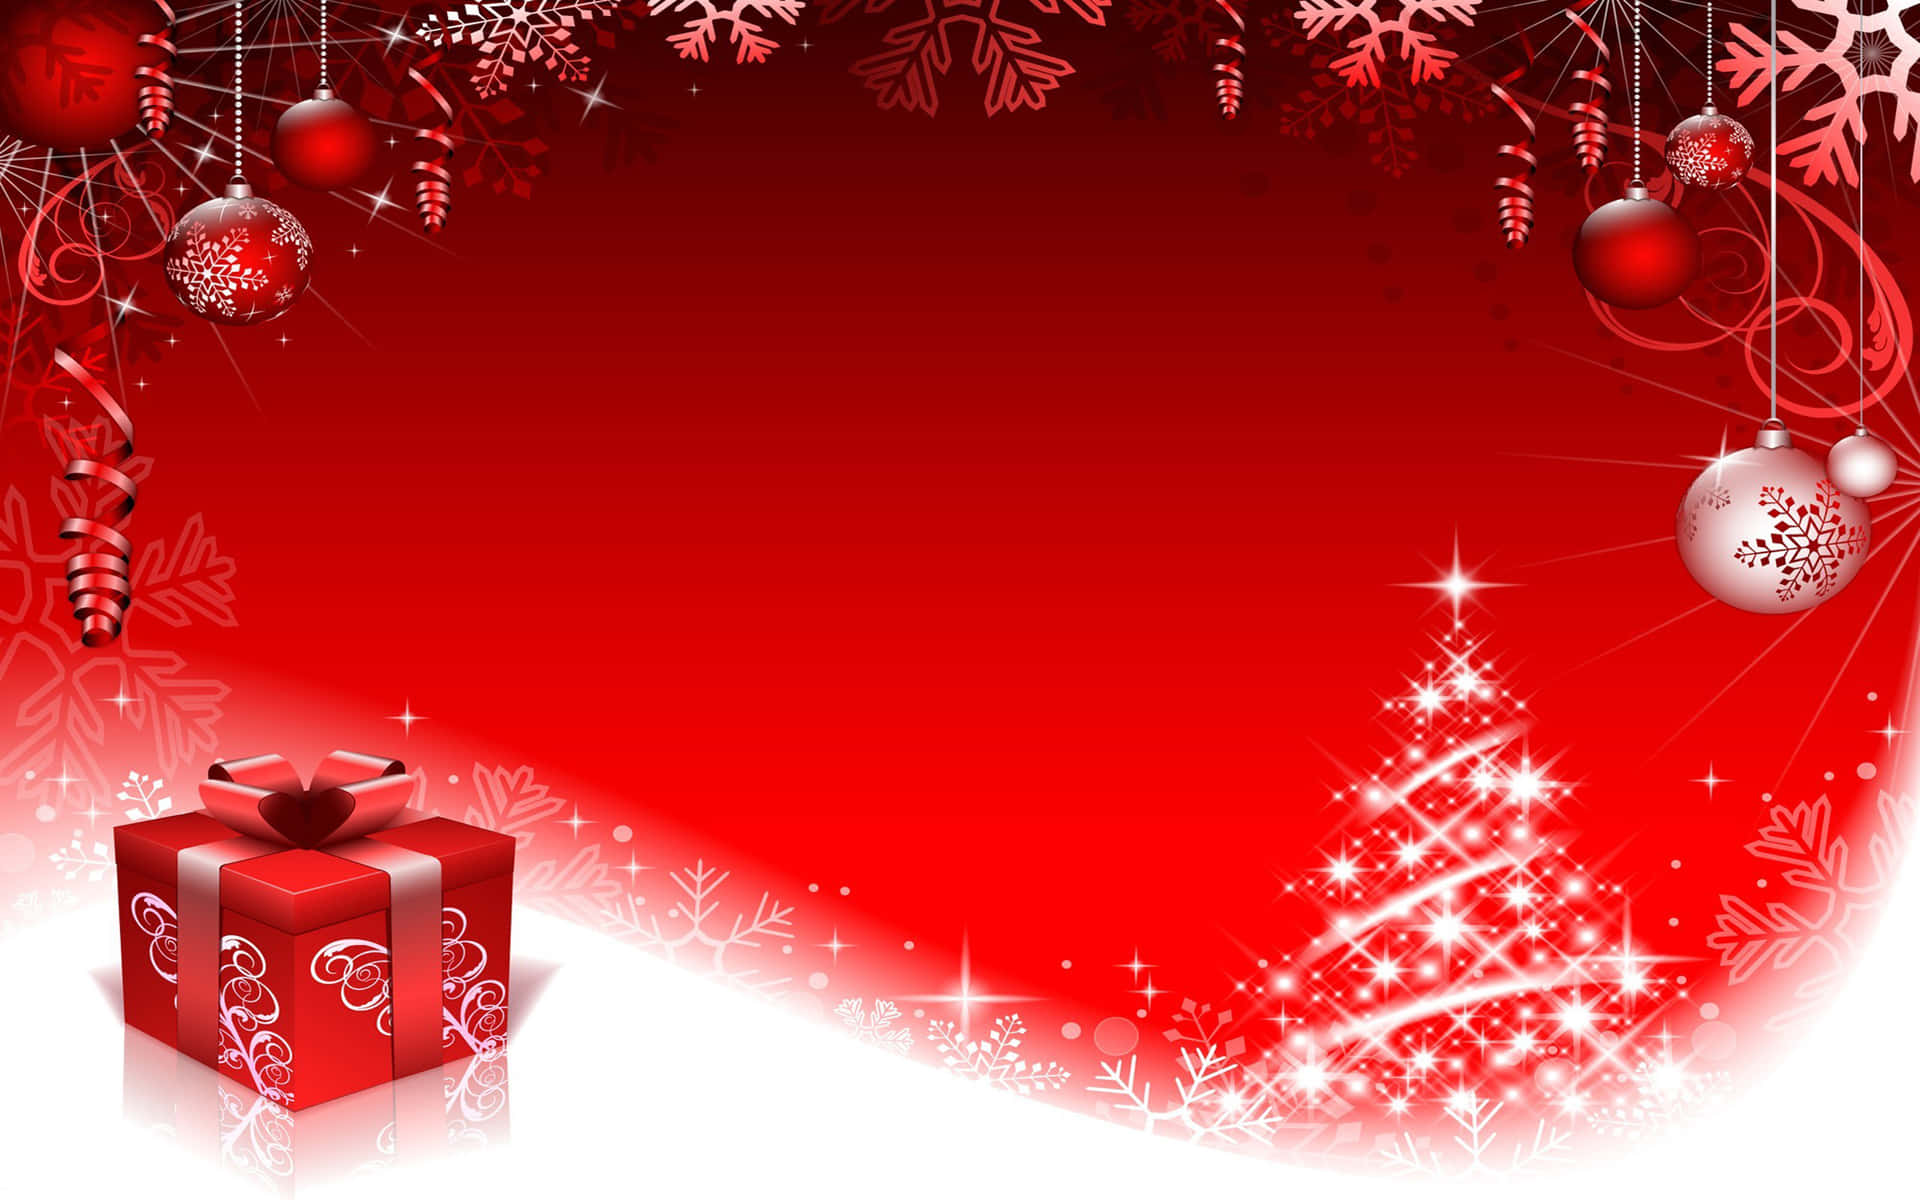 A vibrant Christmas Red background with a festive snowflake design